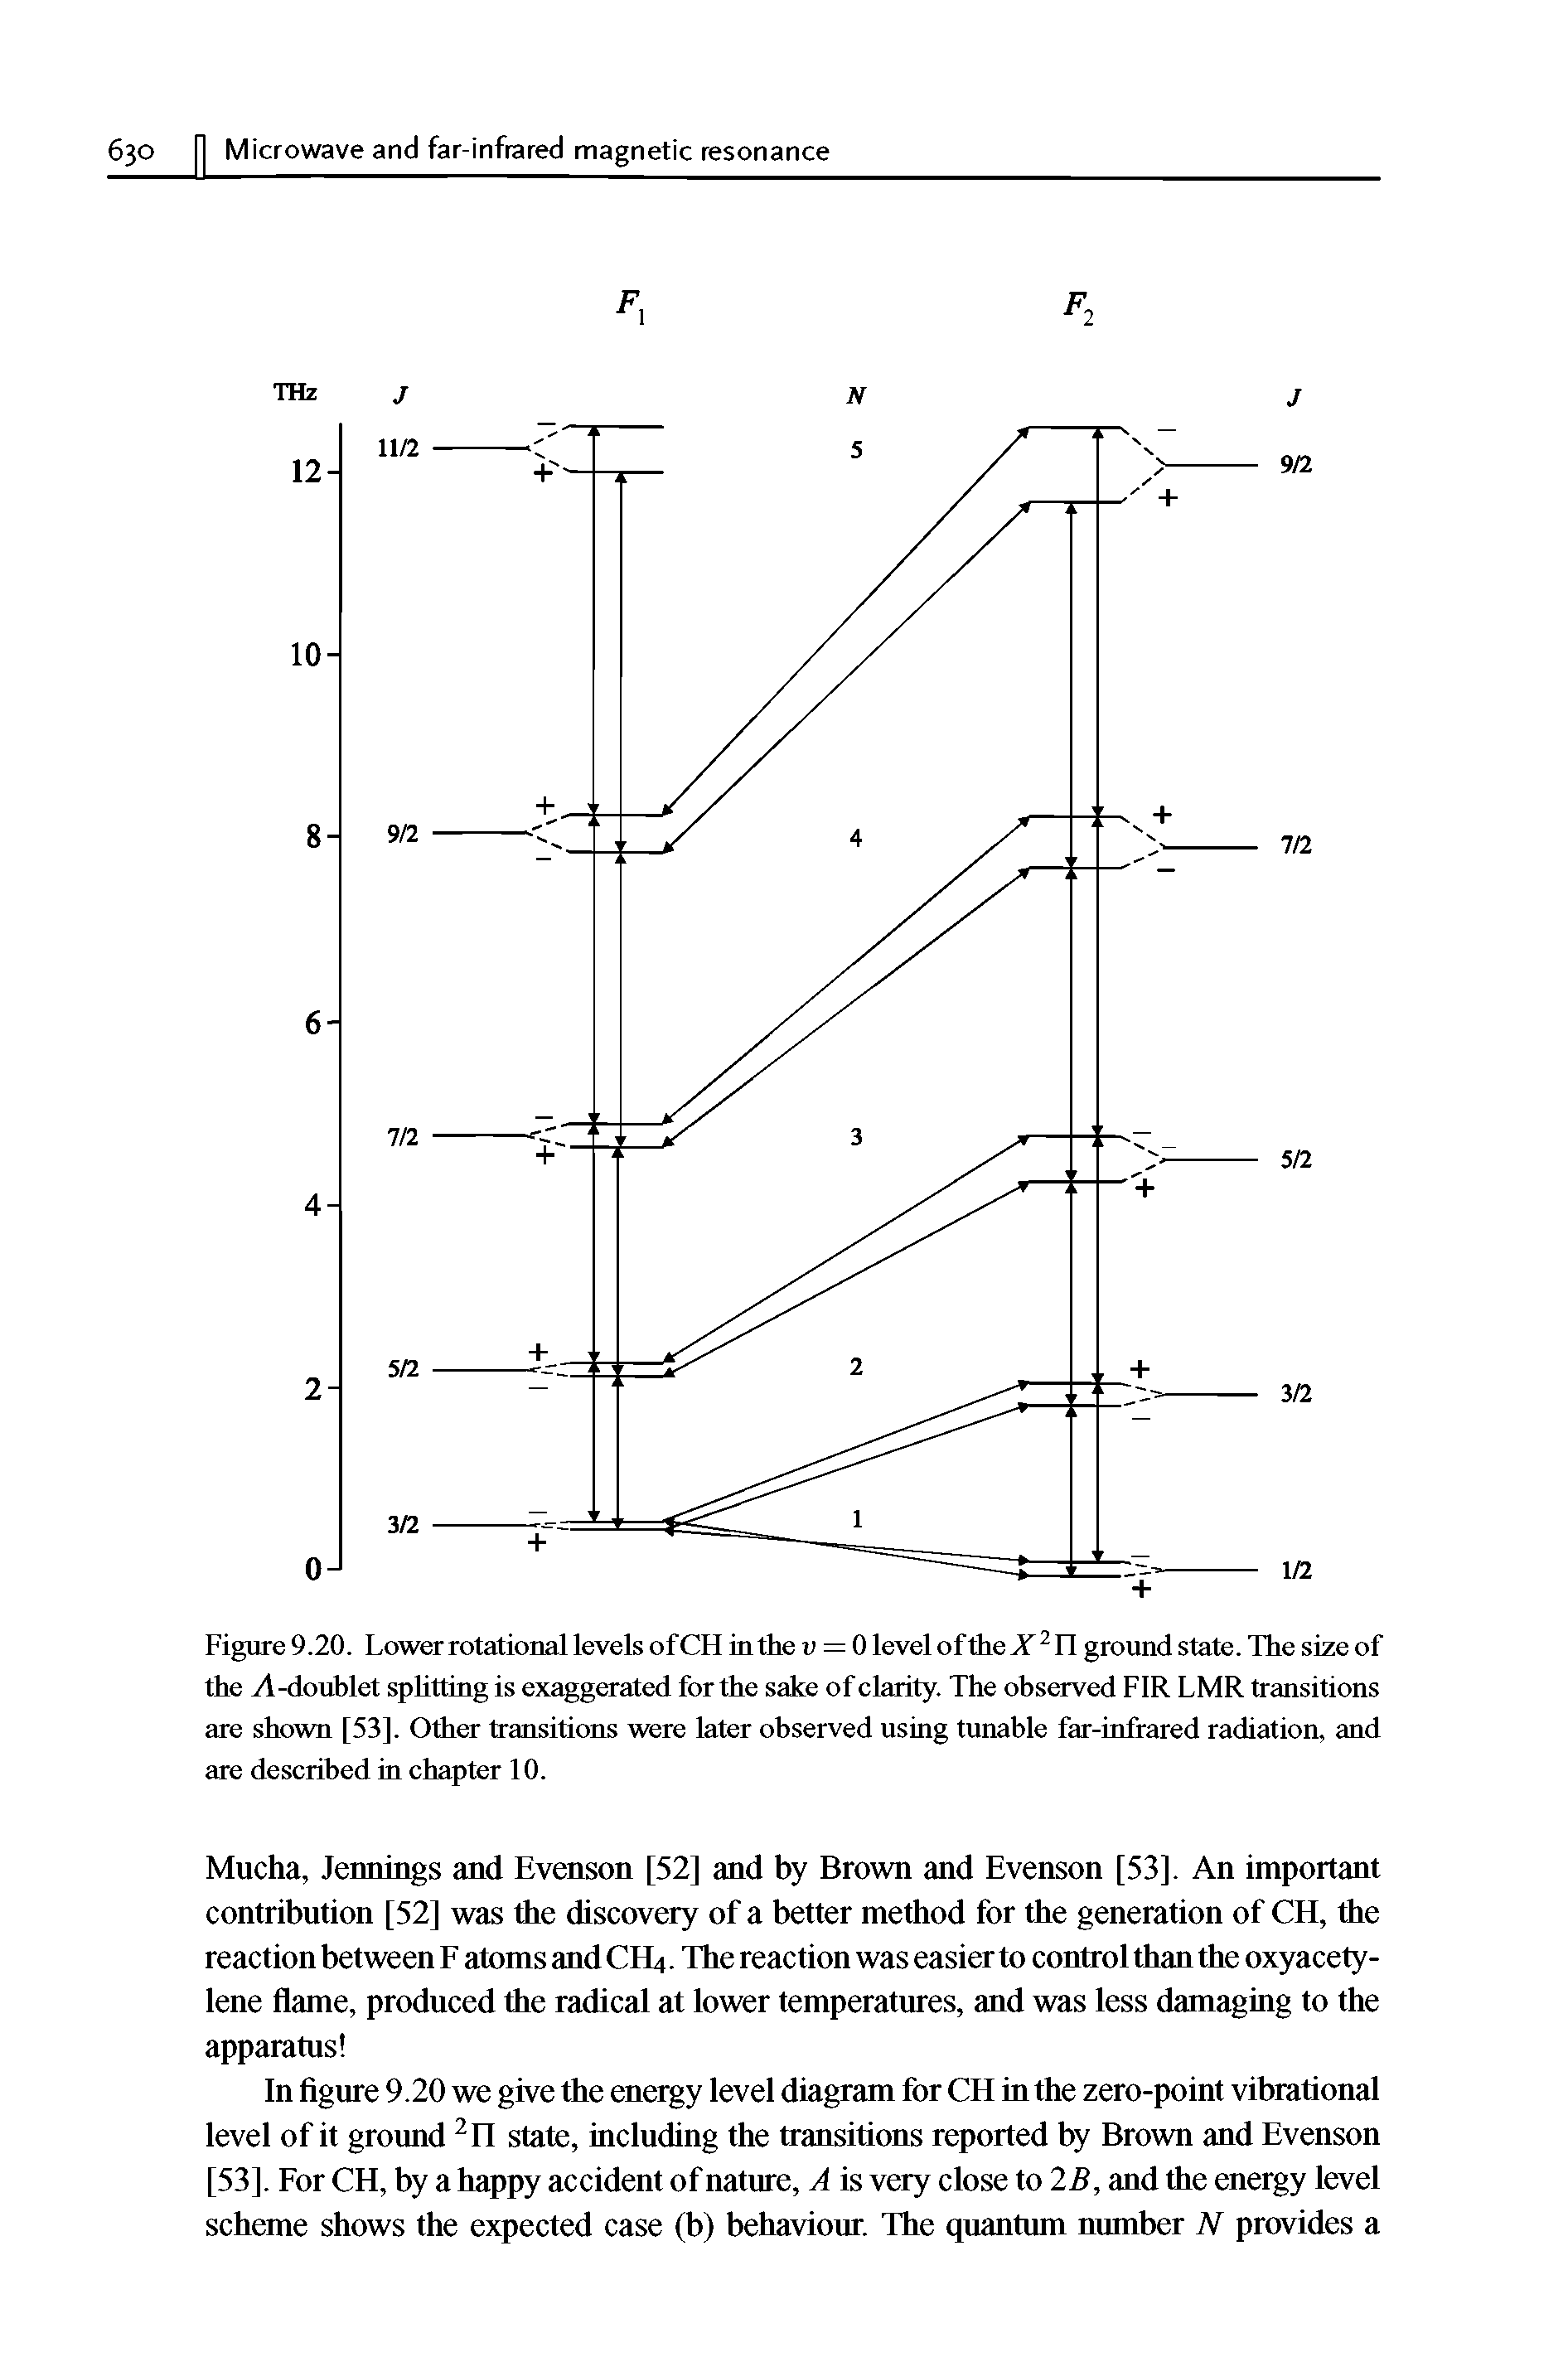 Figure 9.20. Lower rotational levels of CH in the v = 0 level of the X2 If ground state. The size of the A -doublet splitting is exaggerated for the sake of clarity. The observed FIR LMR transitions are shown [53]. Other transitions were later observed using tunable far-infrared radiation, and are described in chapter 10.